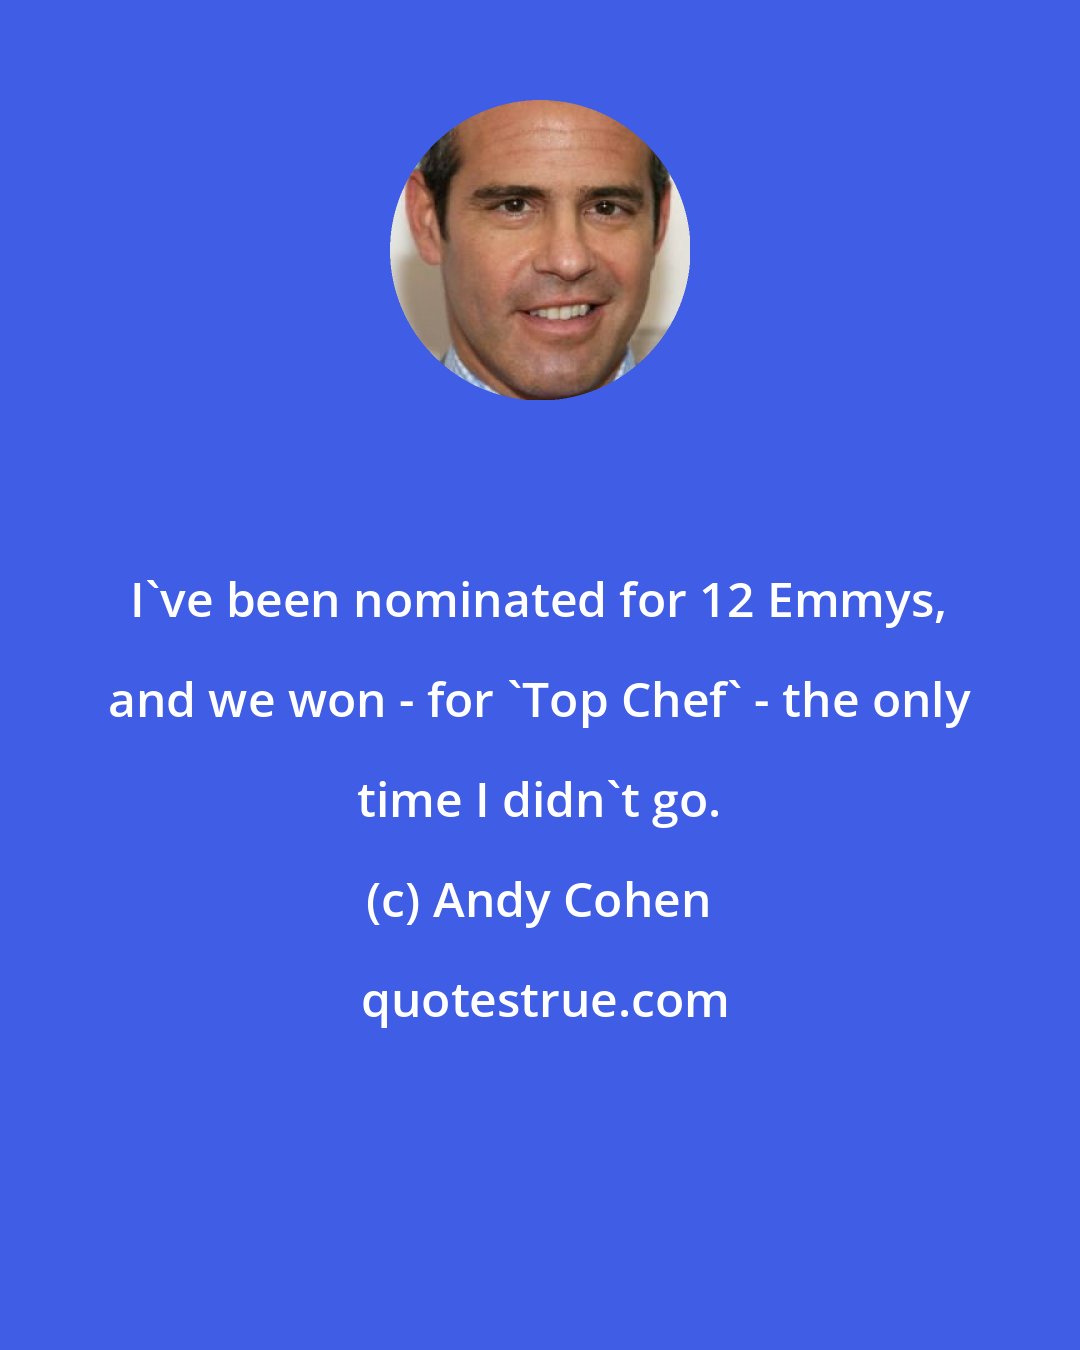 Andy Cohen: I've been nominated for 12 Emmys, and we won - for 'Top Chef' - the only time I didn't go.